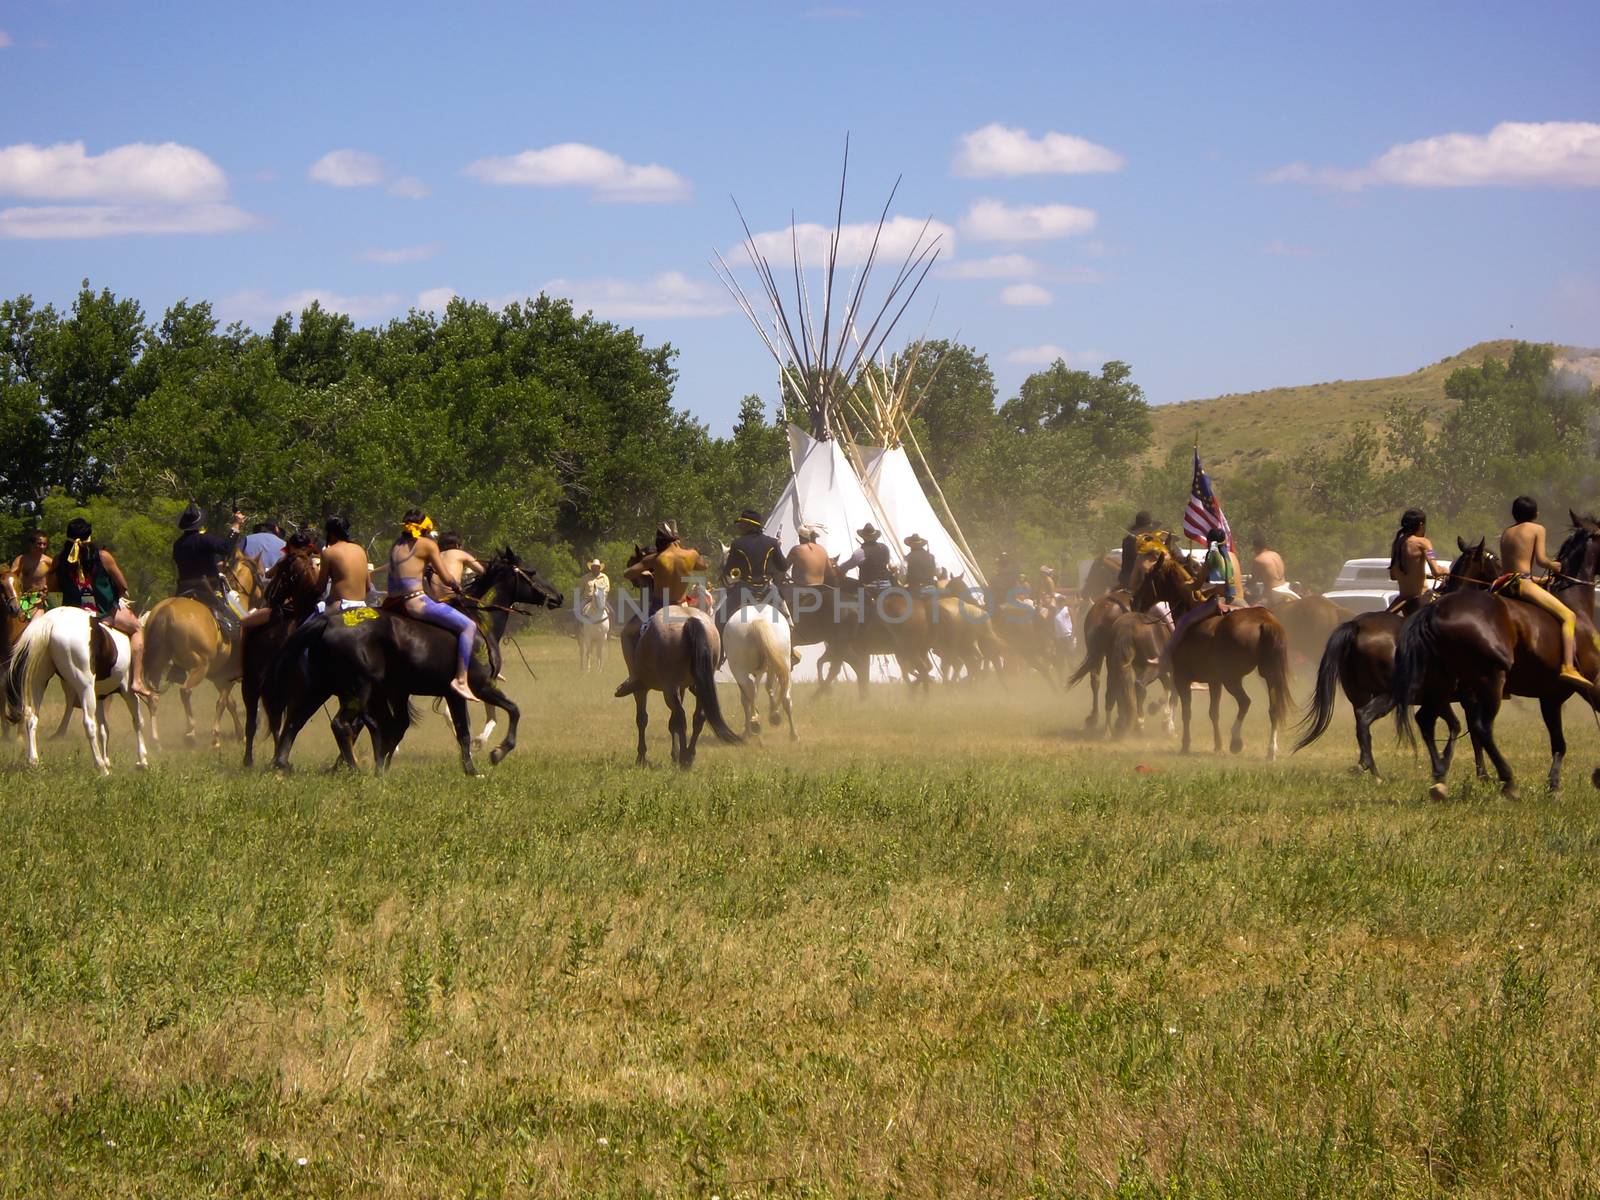 Two worlds meet at Battle of the Little Bighorn Re-enactment by emattil